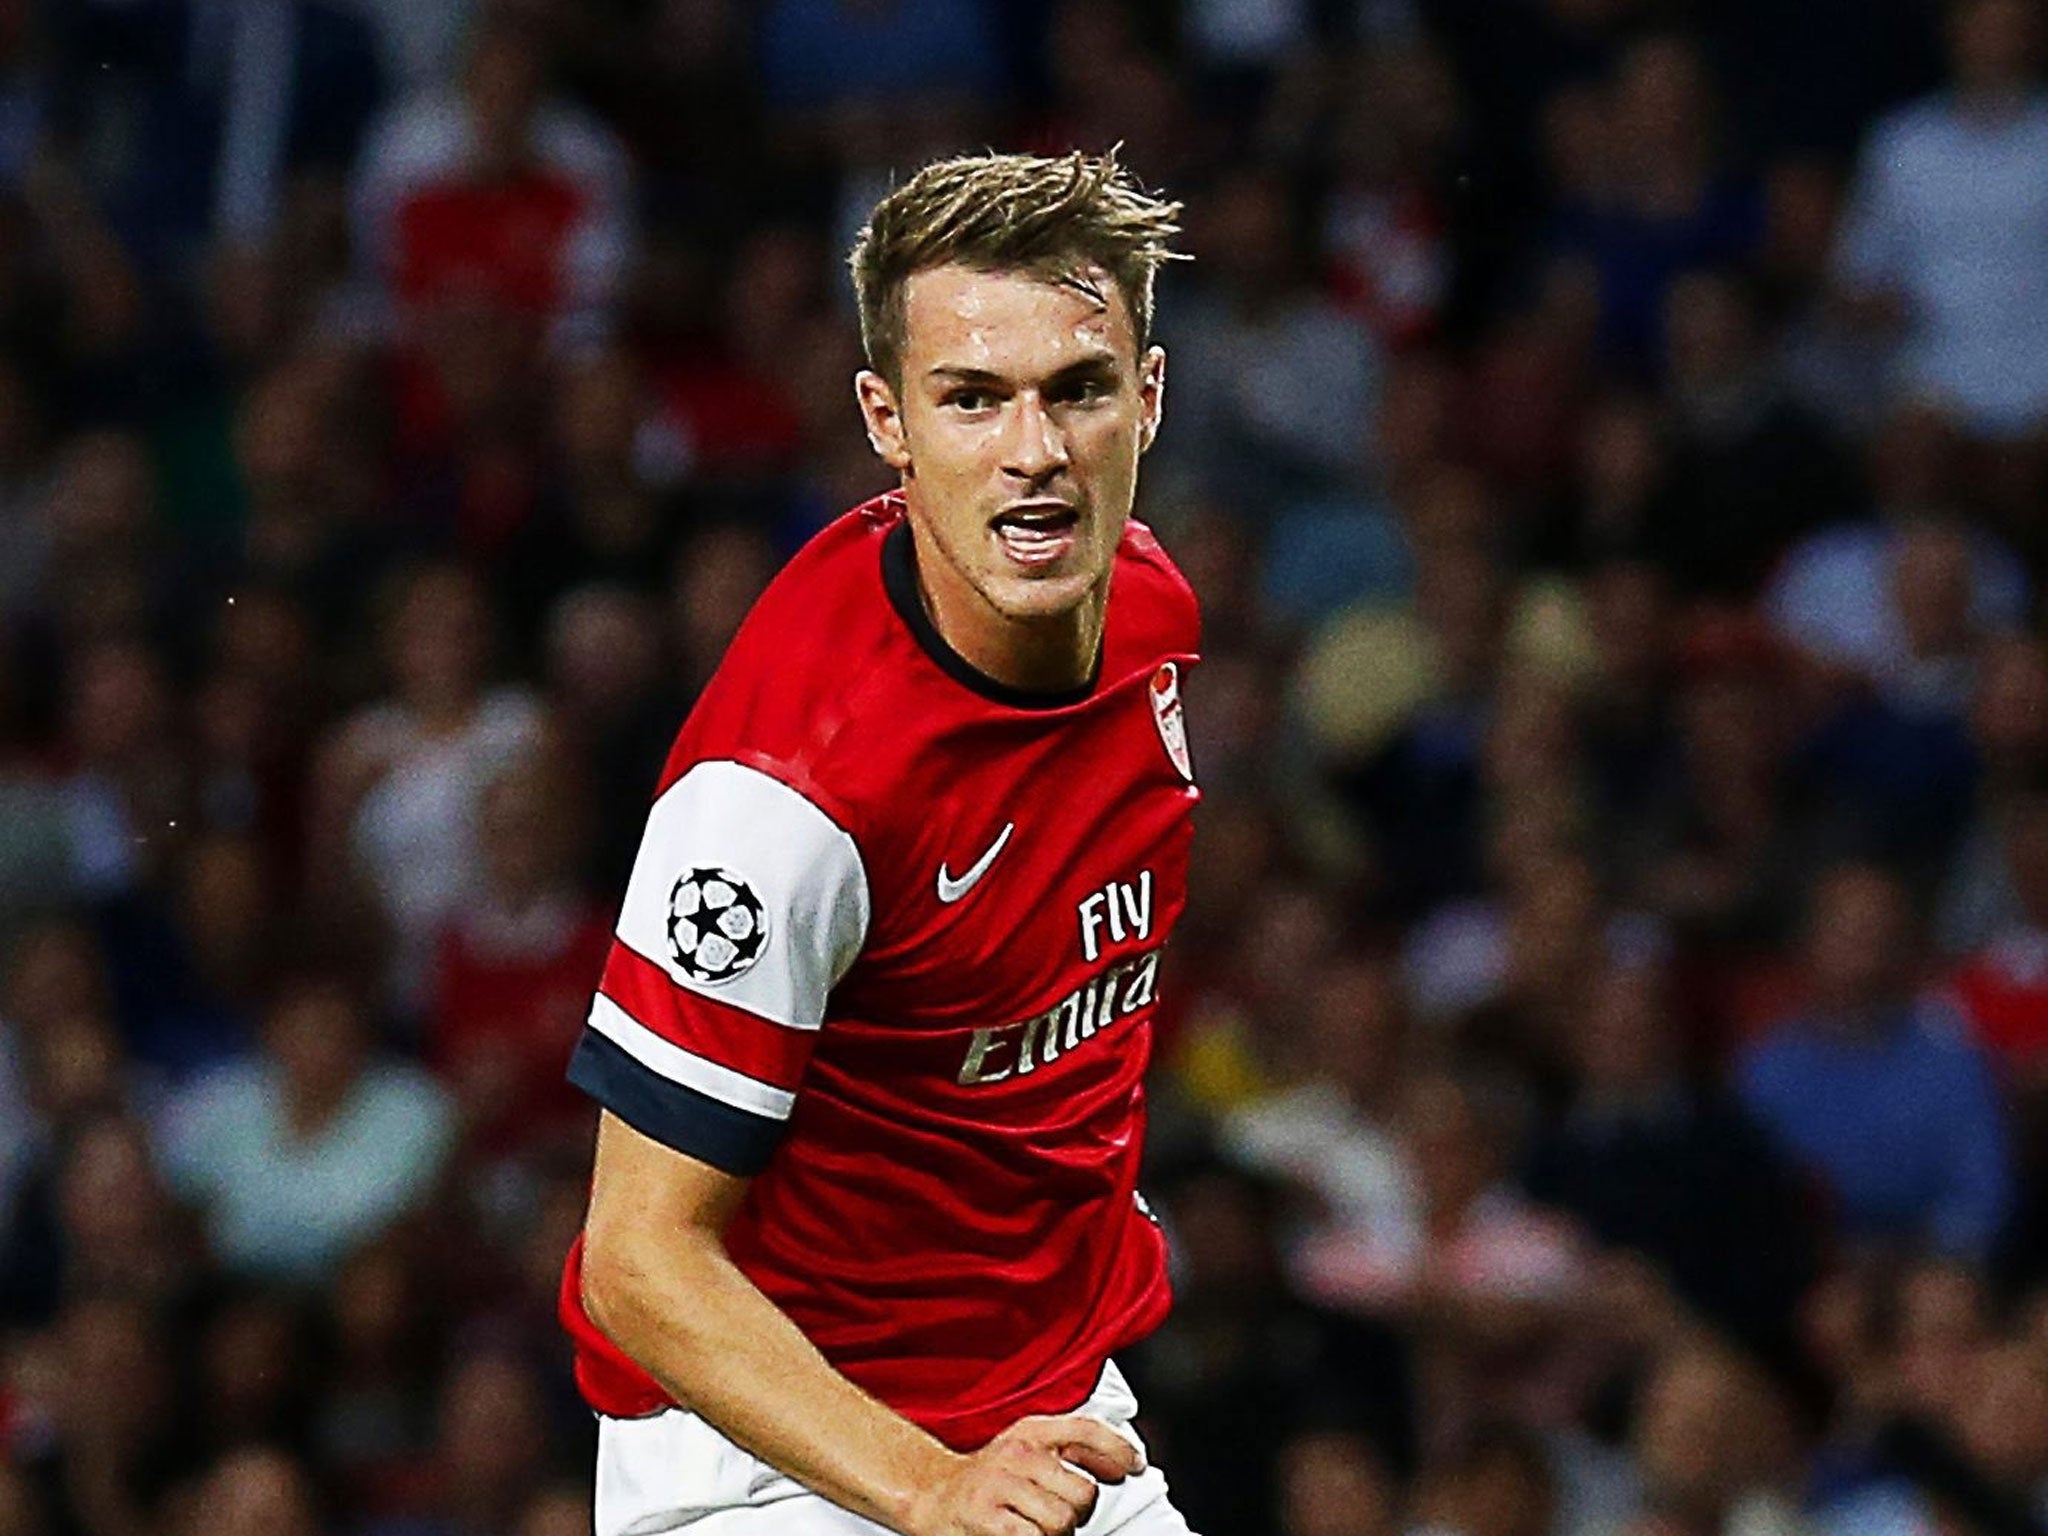 Aaron Ramsey is the form player for Arsenal